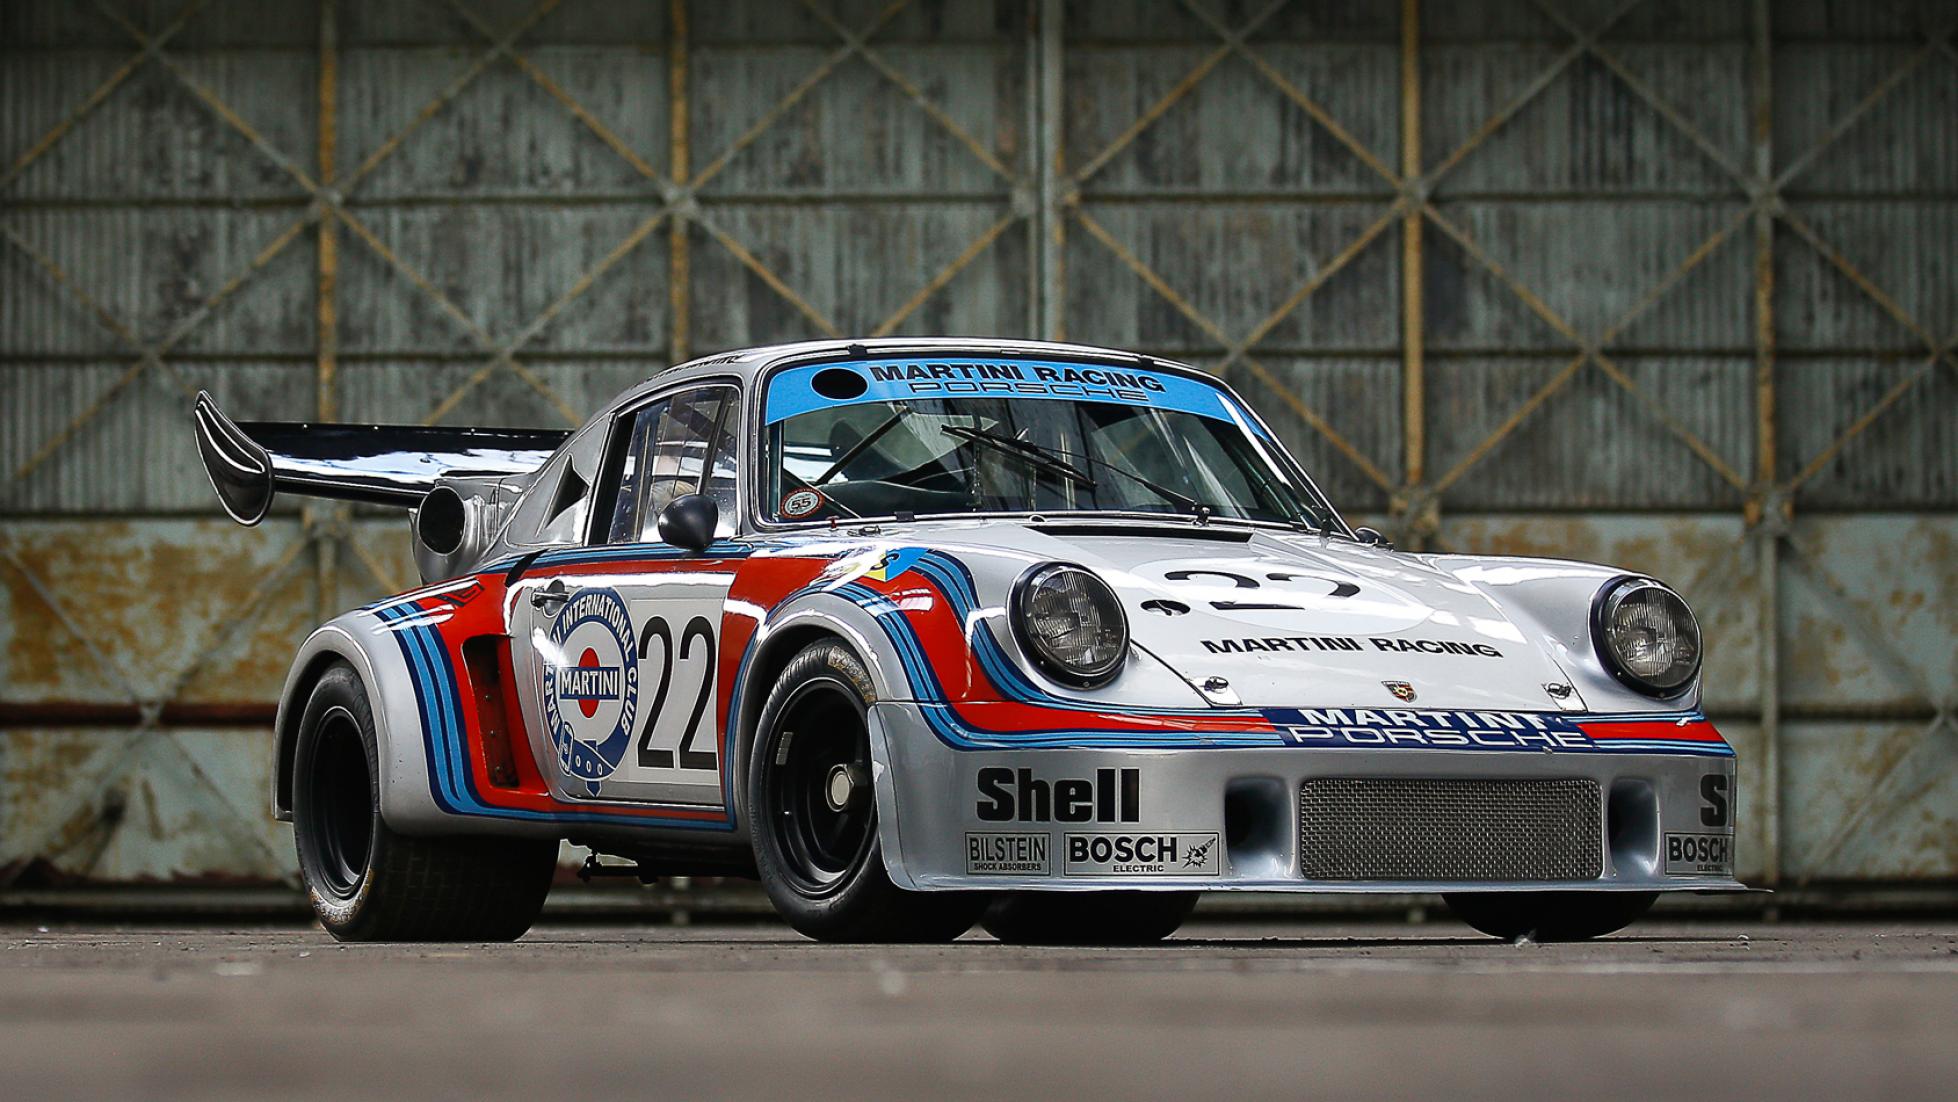 The most iconic Porsches in the history of racing